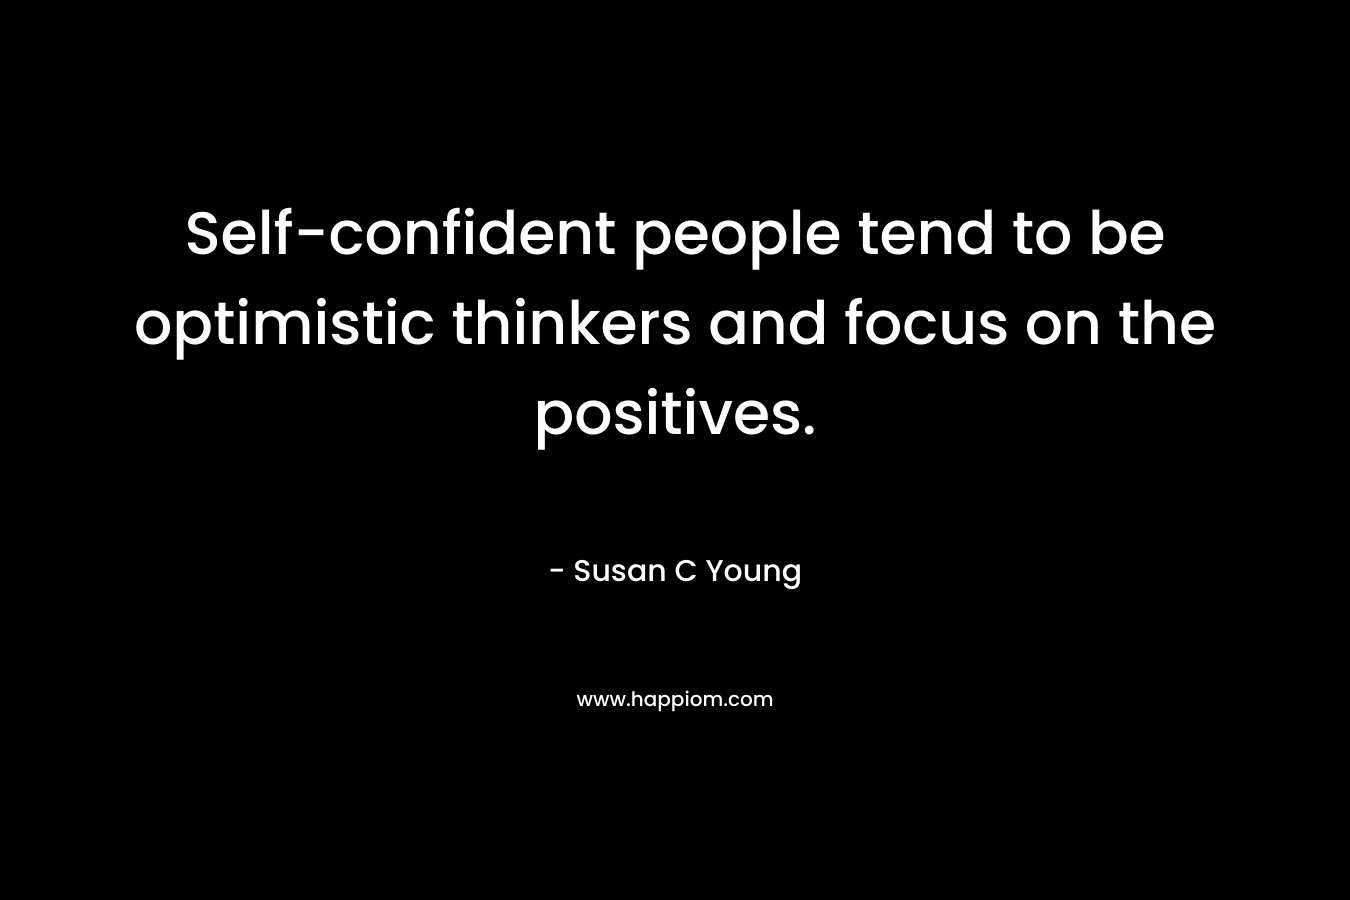 Self-confident people tend to be optimistic thinkers and focus on the positives.